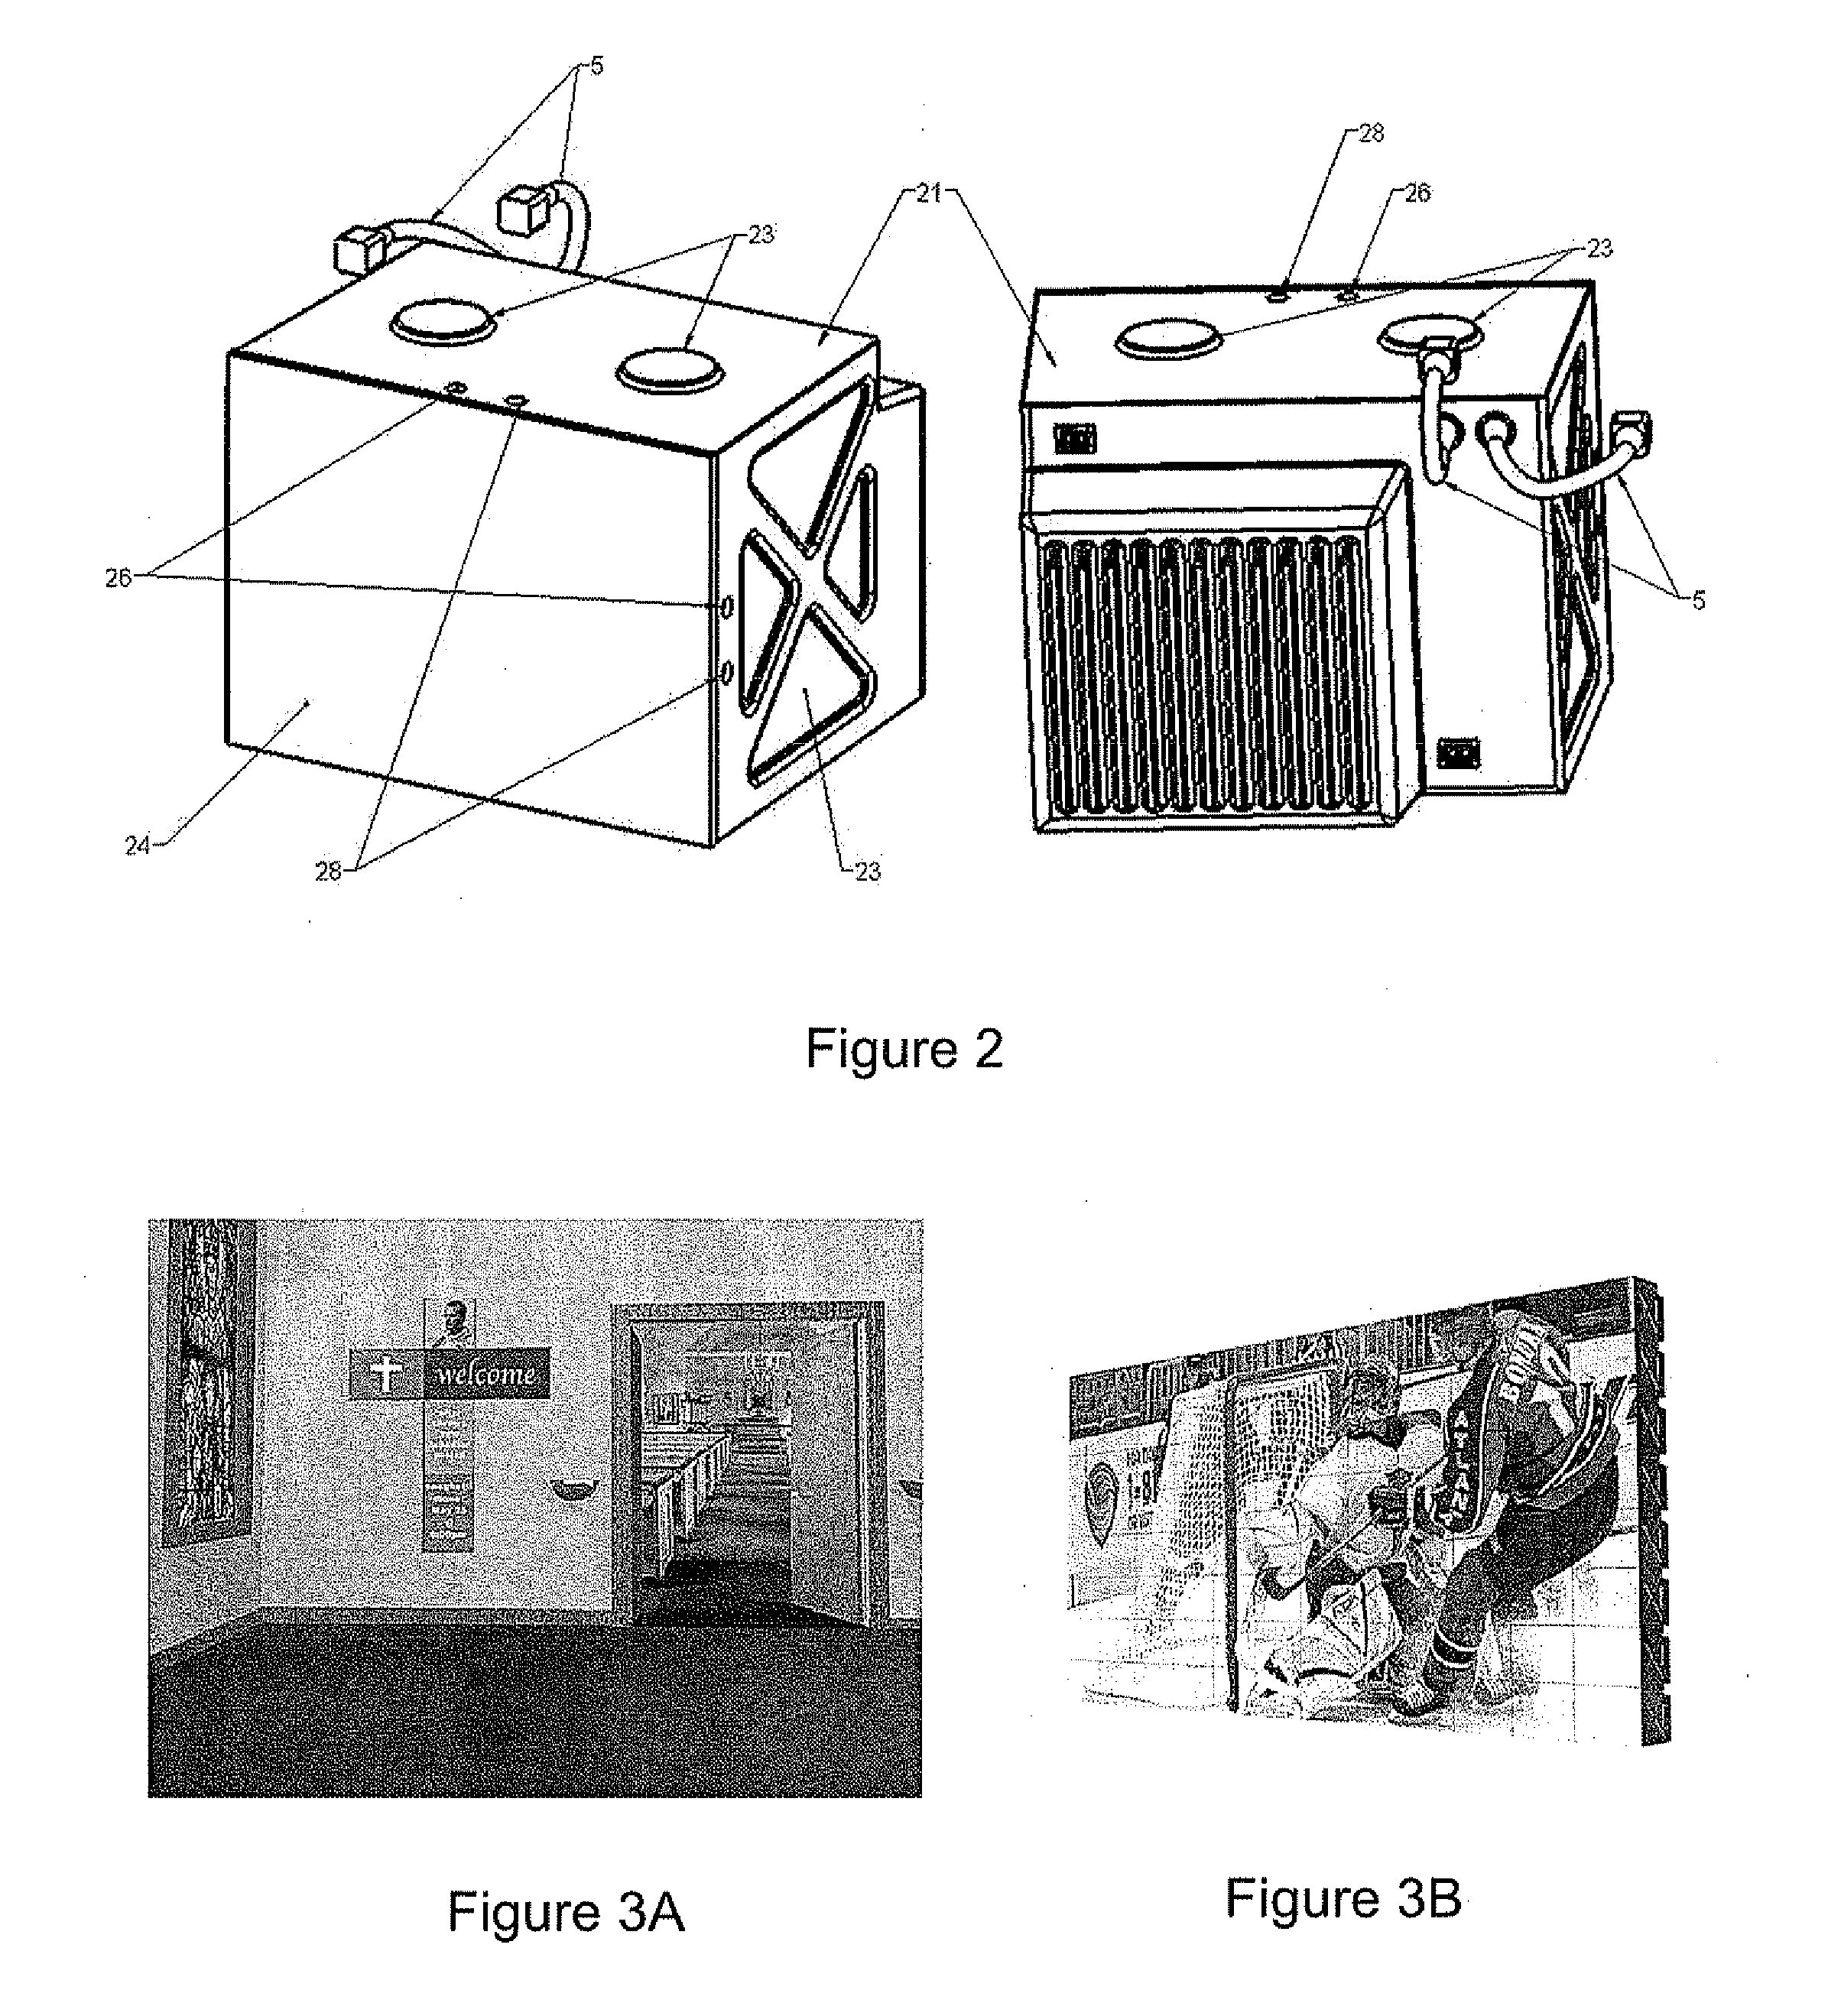 Configurable imaging system